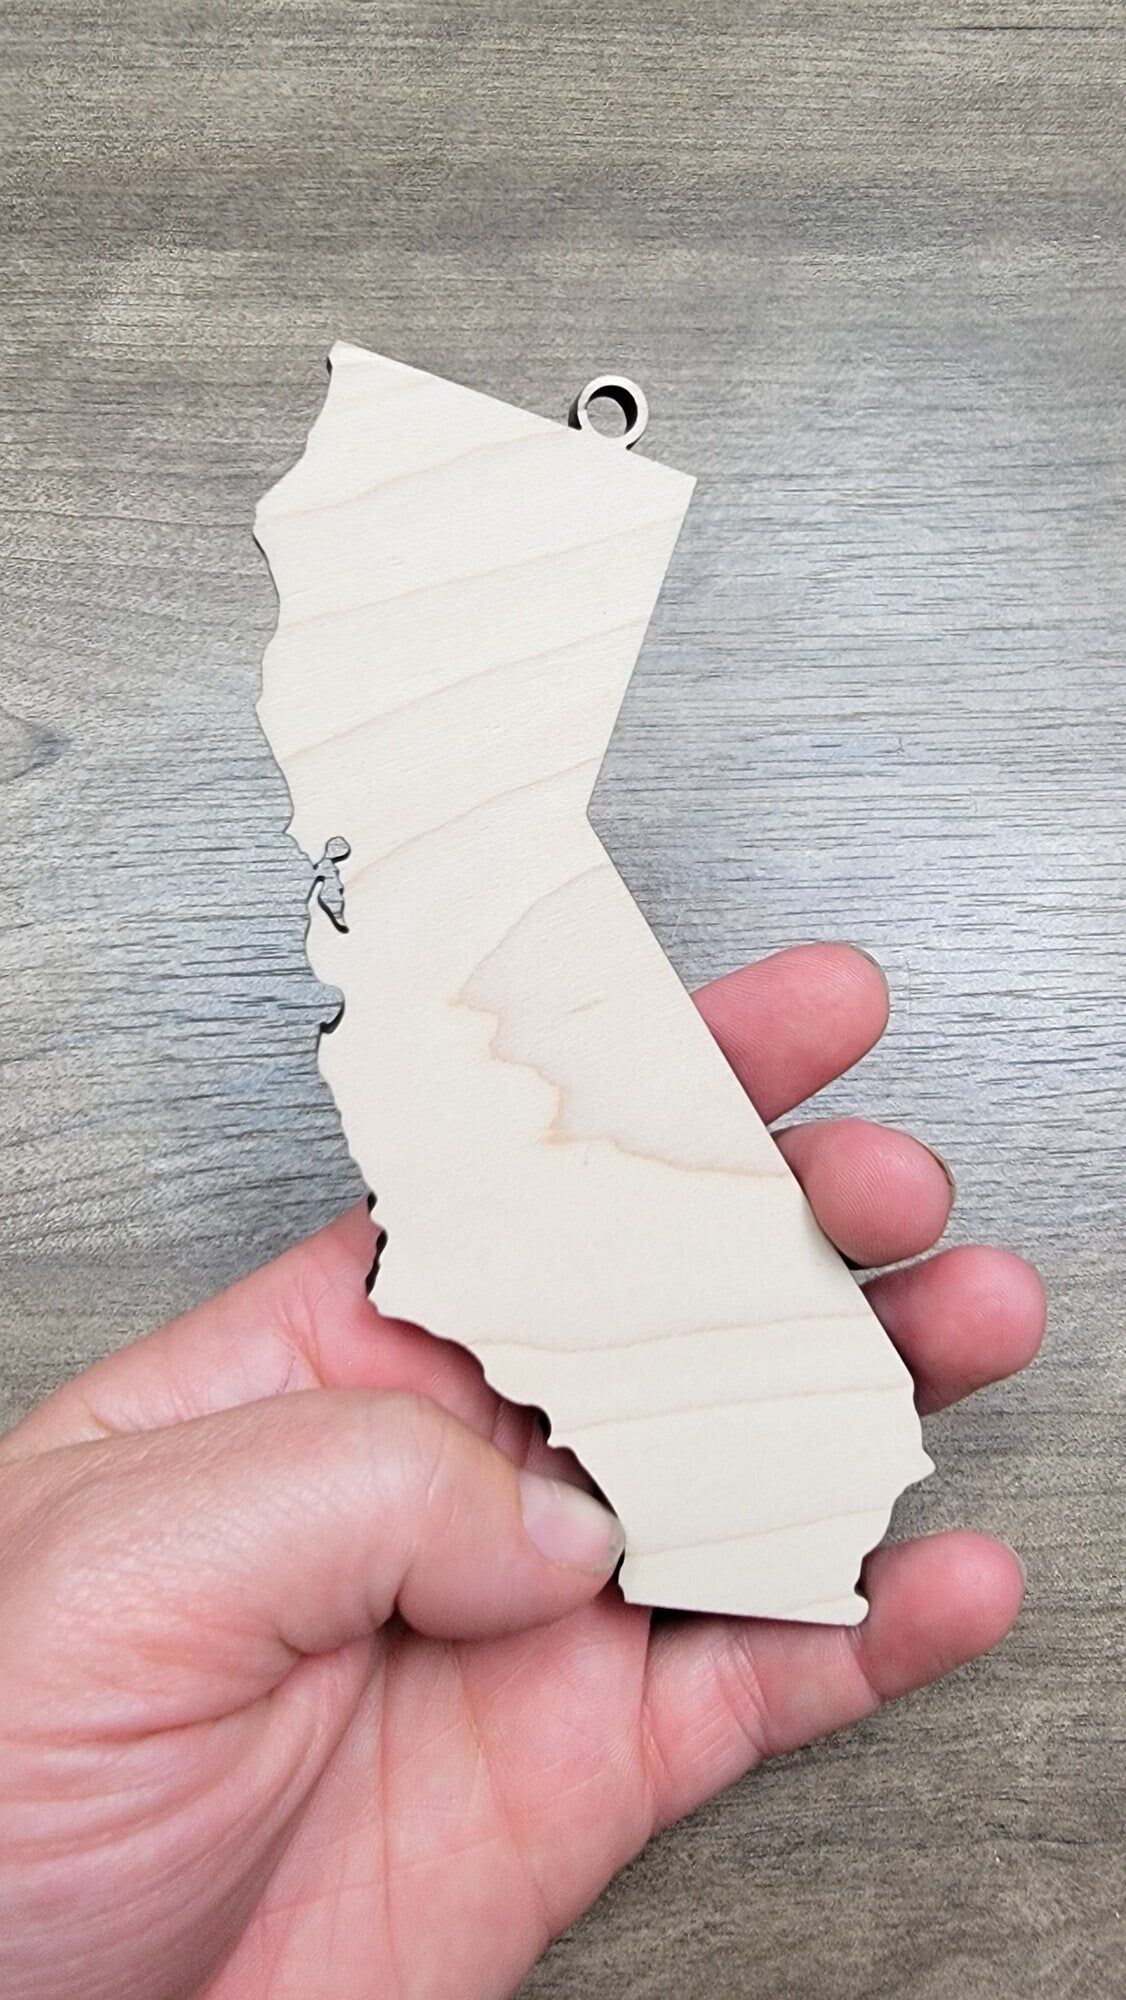 California Ornament, CA State Shape Bulk wood Blank, Unfinished, Wood Ornament, DIY, Christmas ornaments, Blanks for Crafts, sign making